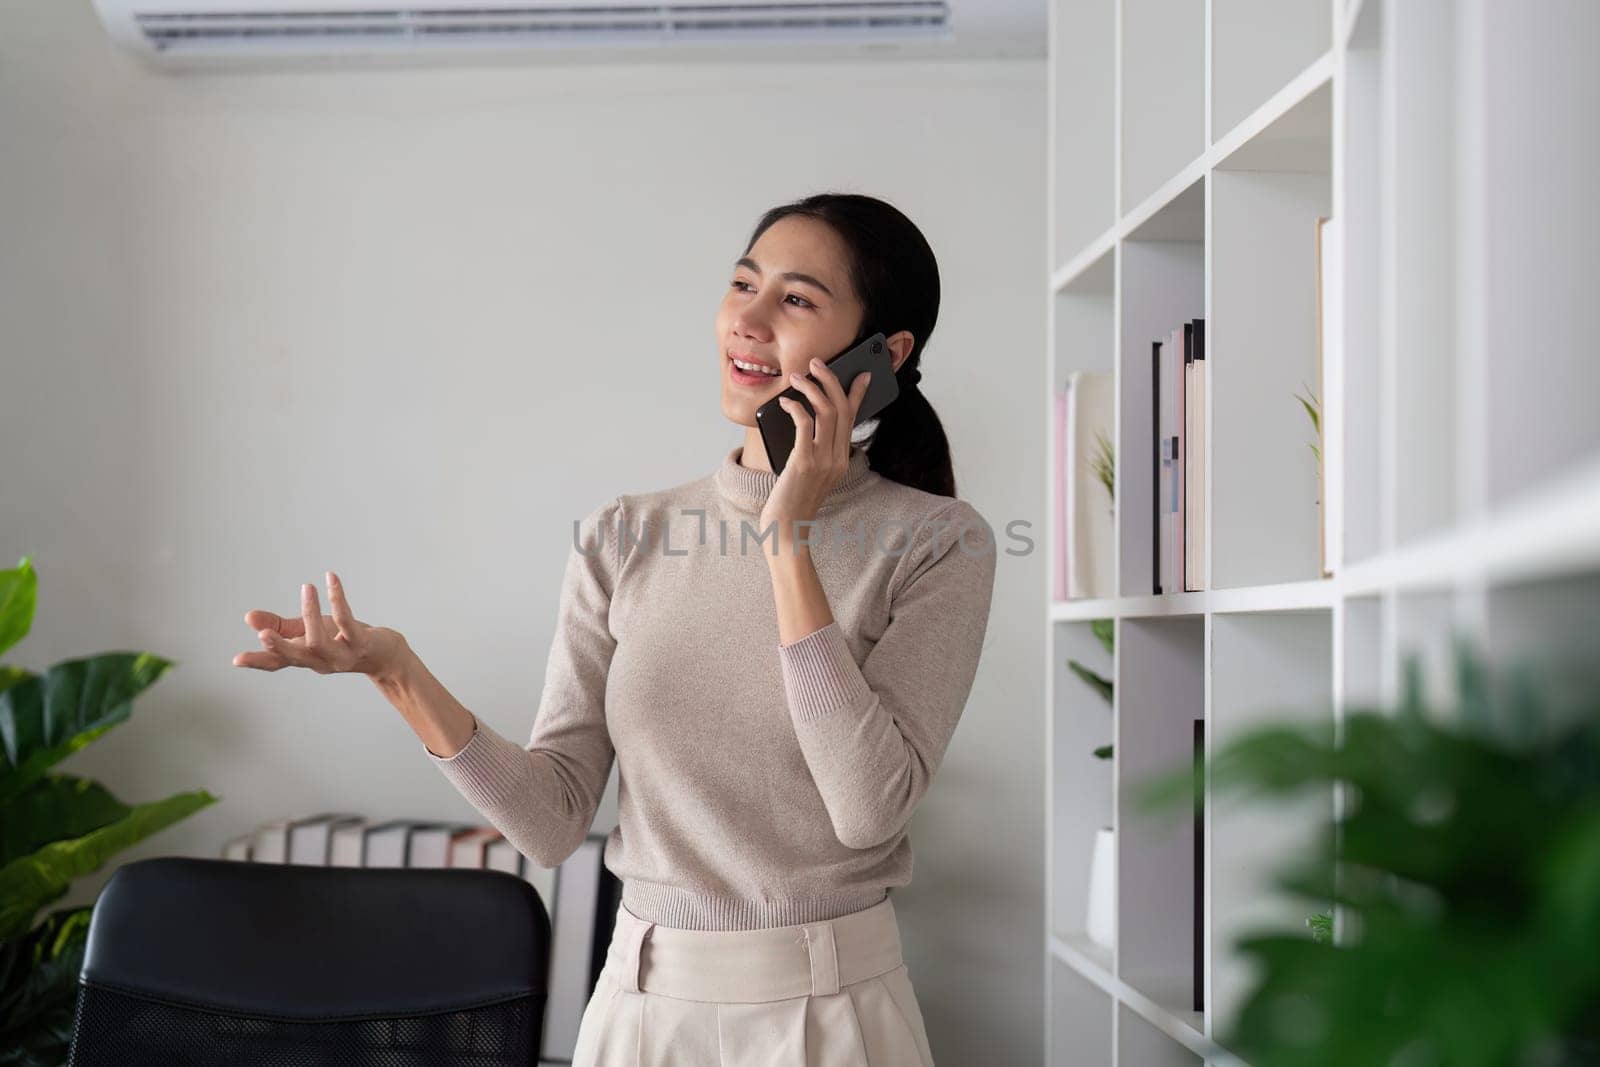 Successful businesswoman speaking by smartphone and smiling happily while standing in office.